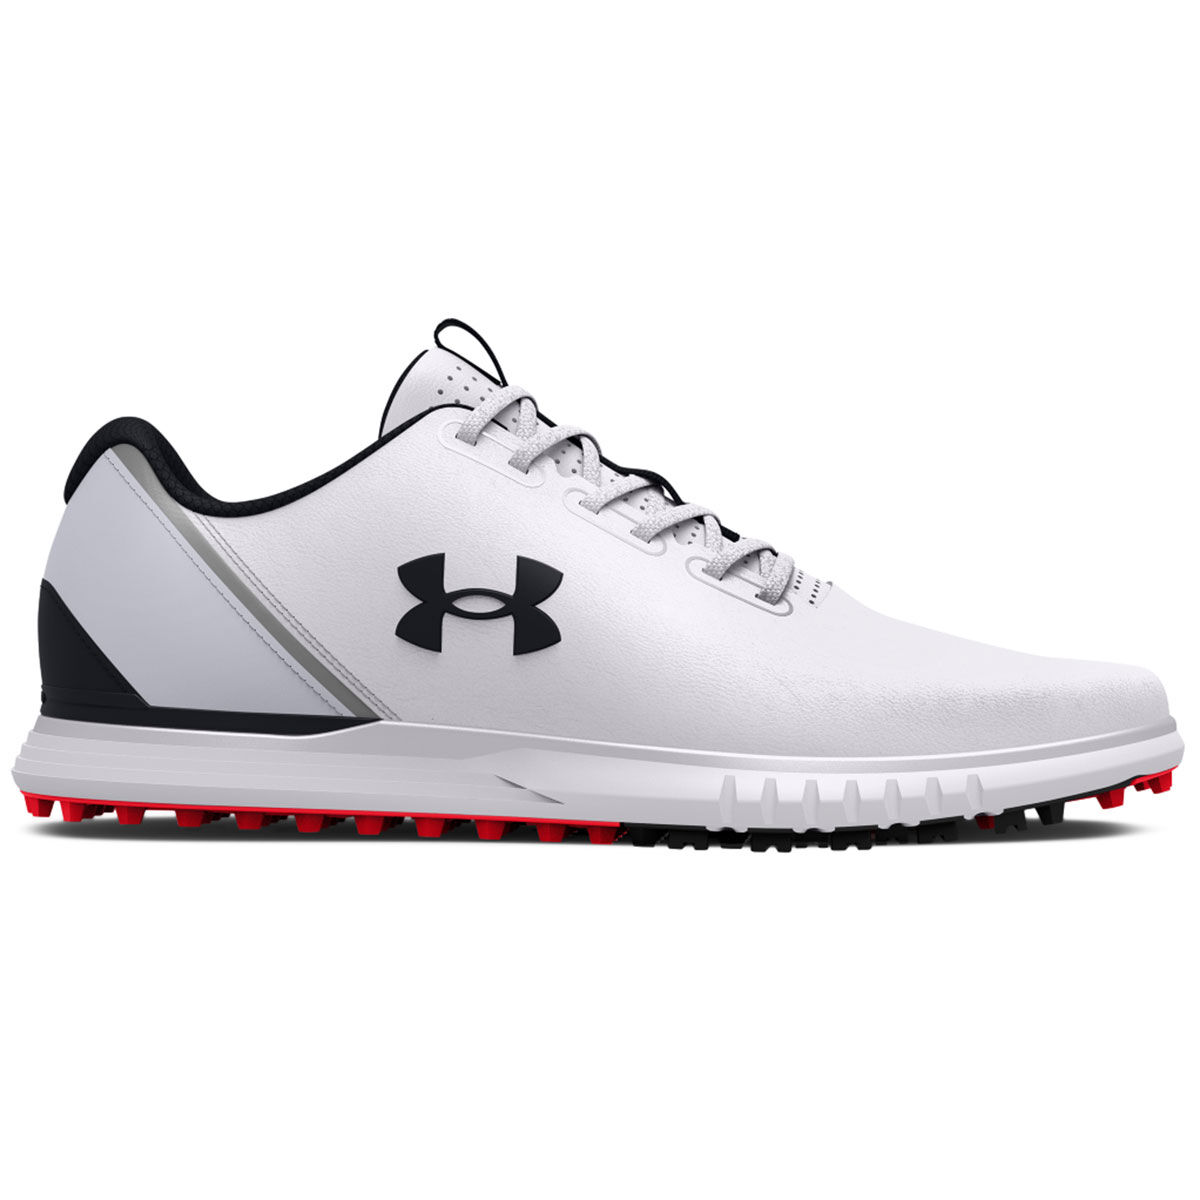 Under Armour Men's Medal Waterproof Spikeless Golf Shoes, Mens, White/grey/black, 7 | American Golf - Father's Day Gift von Under Armour